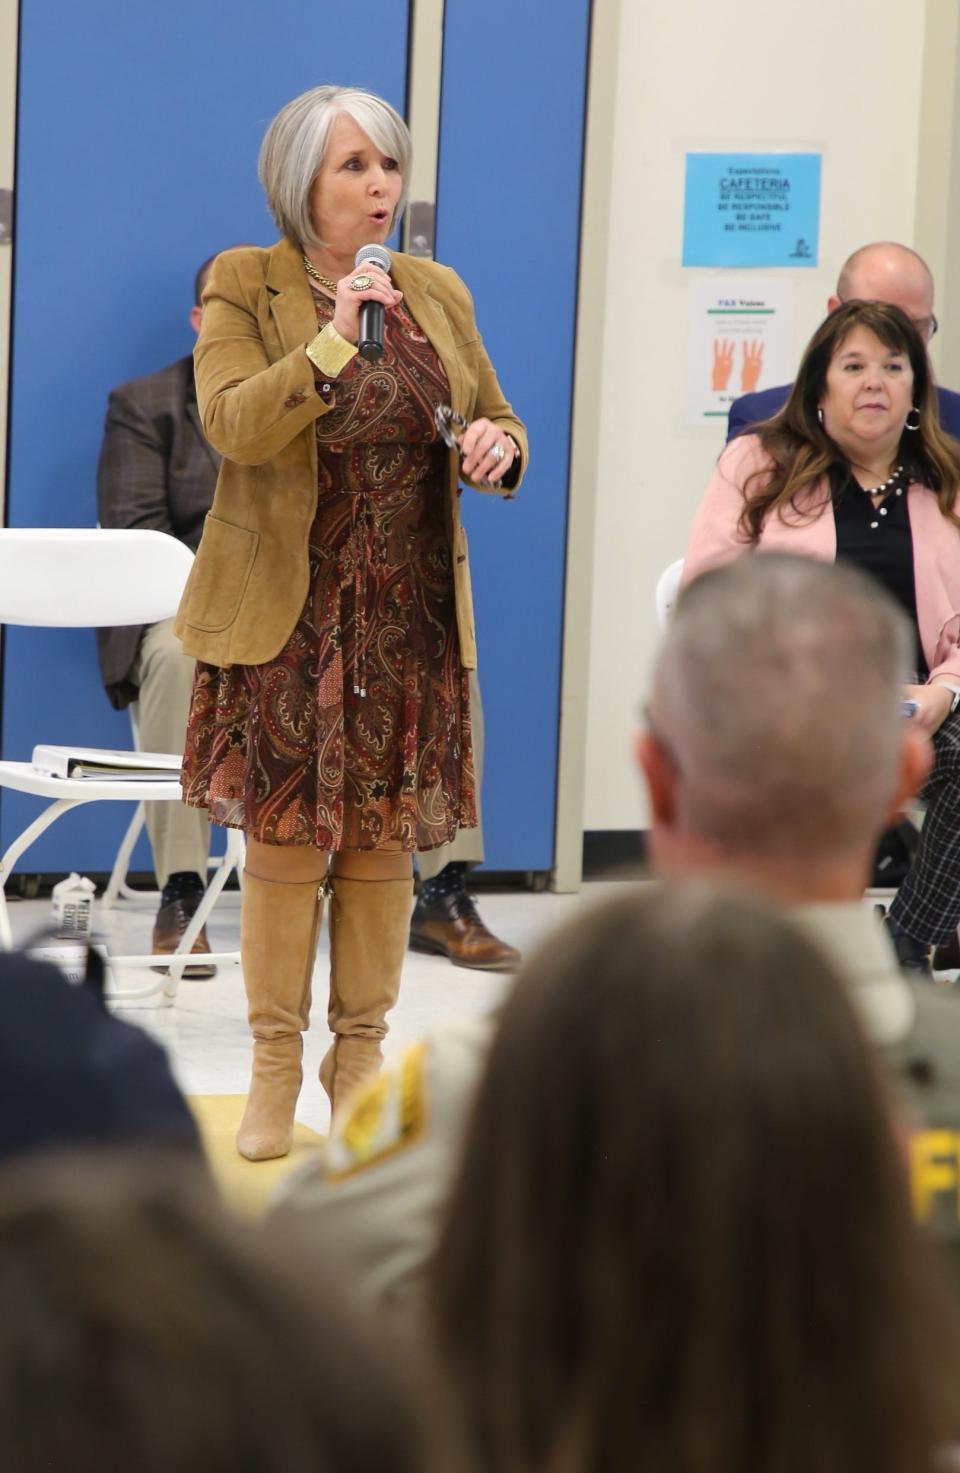 Gov. Michelle Lujan Grisham addresses the crowd at a town hall meeting on Thursday, April 11 at Animas Elementary School in Farmington.